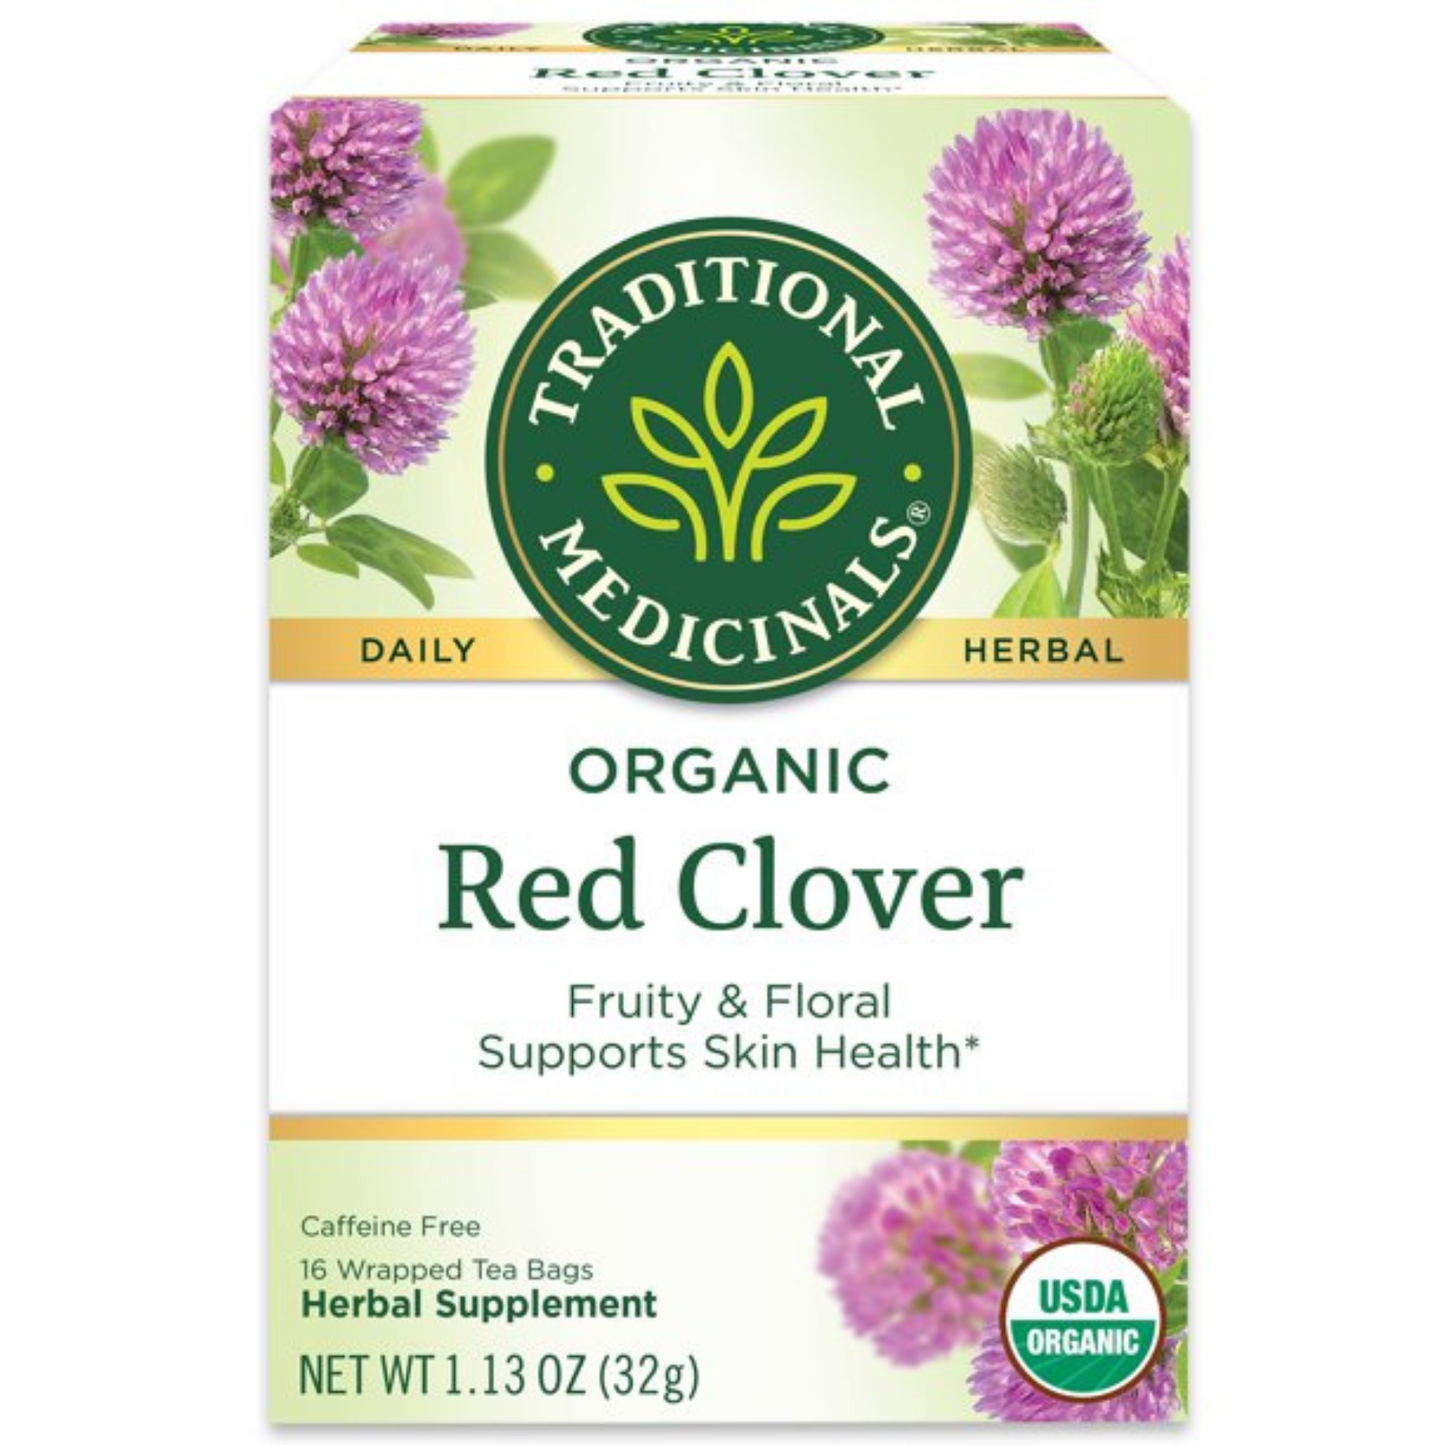 Primary Image of Red Clover Tea Bags